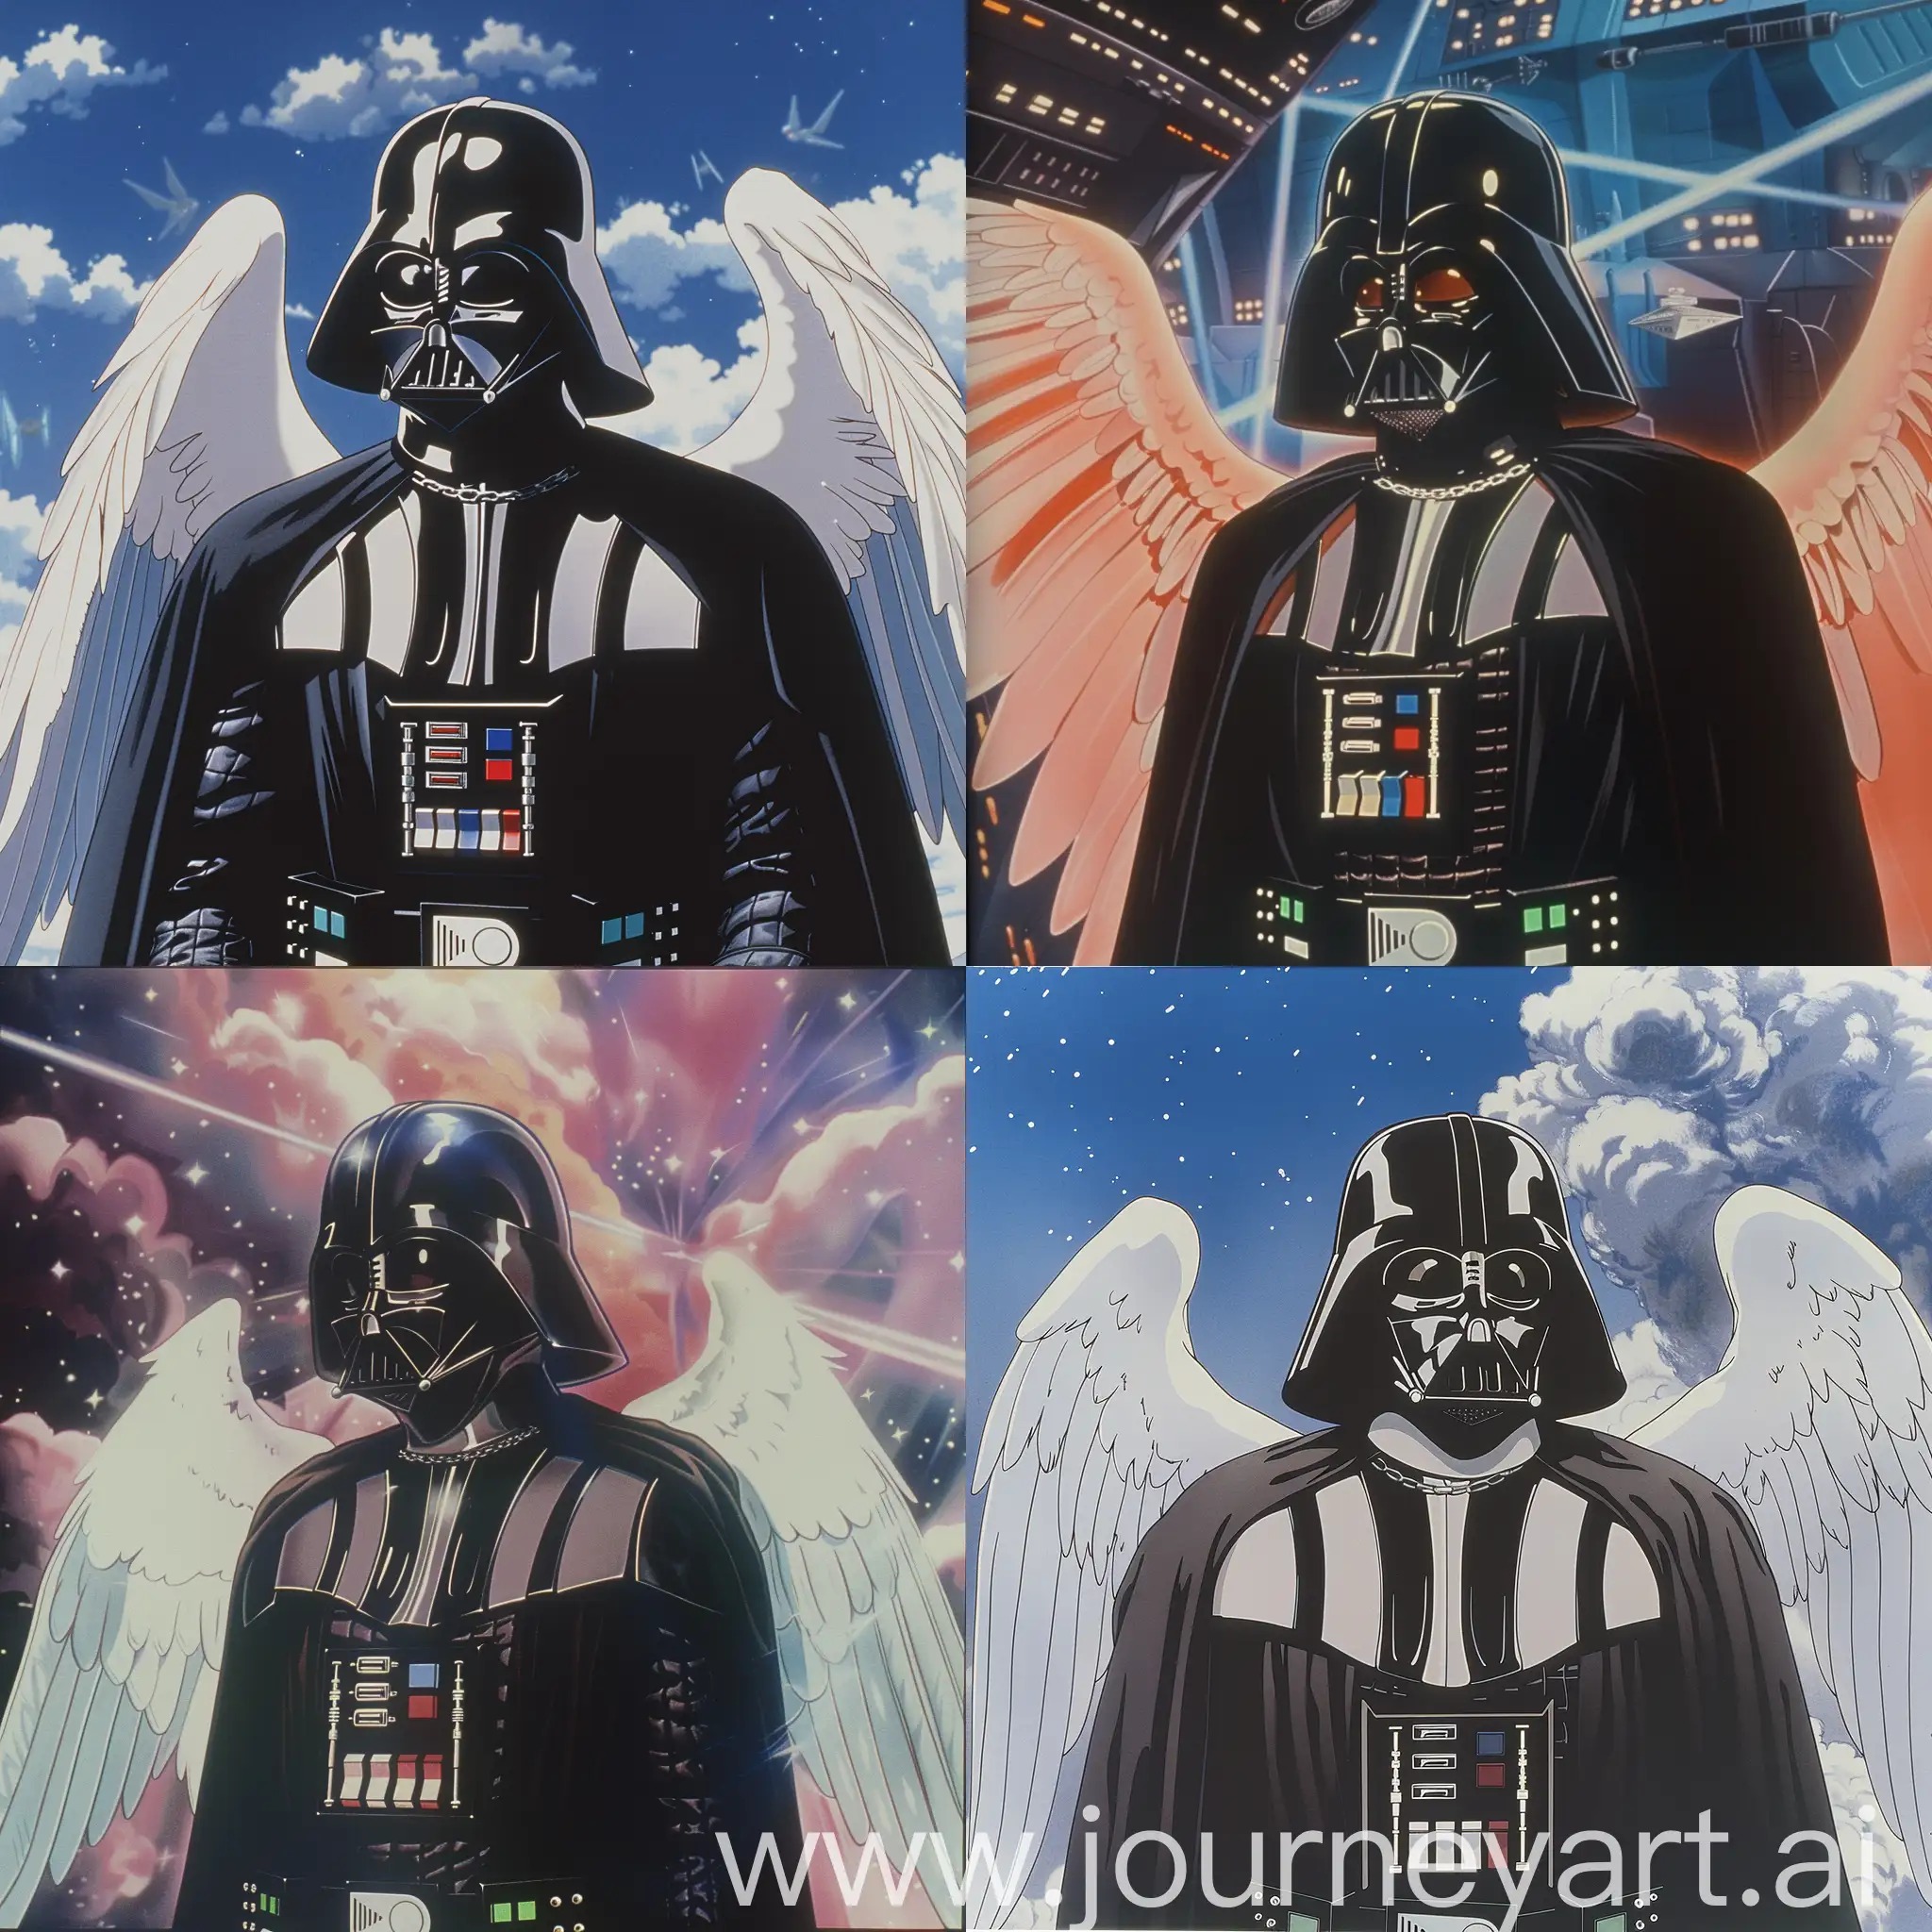 Darth Vader portrait in anime genre film, dvd screenshot from anime film, angel costume and 80s anime film composition